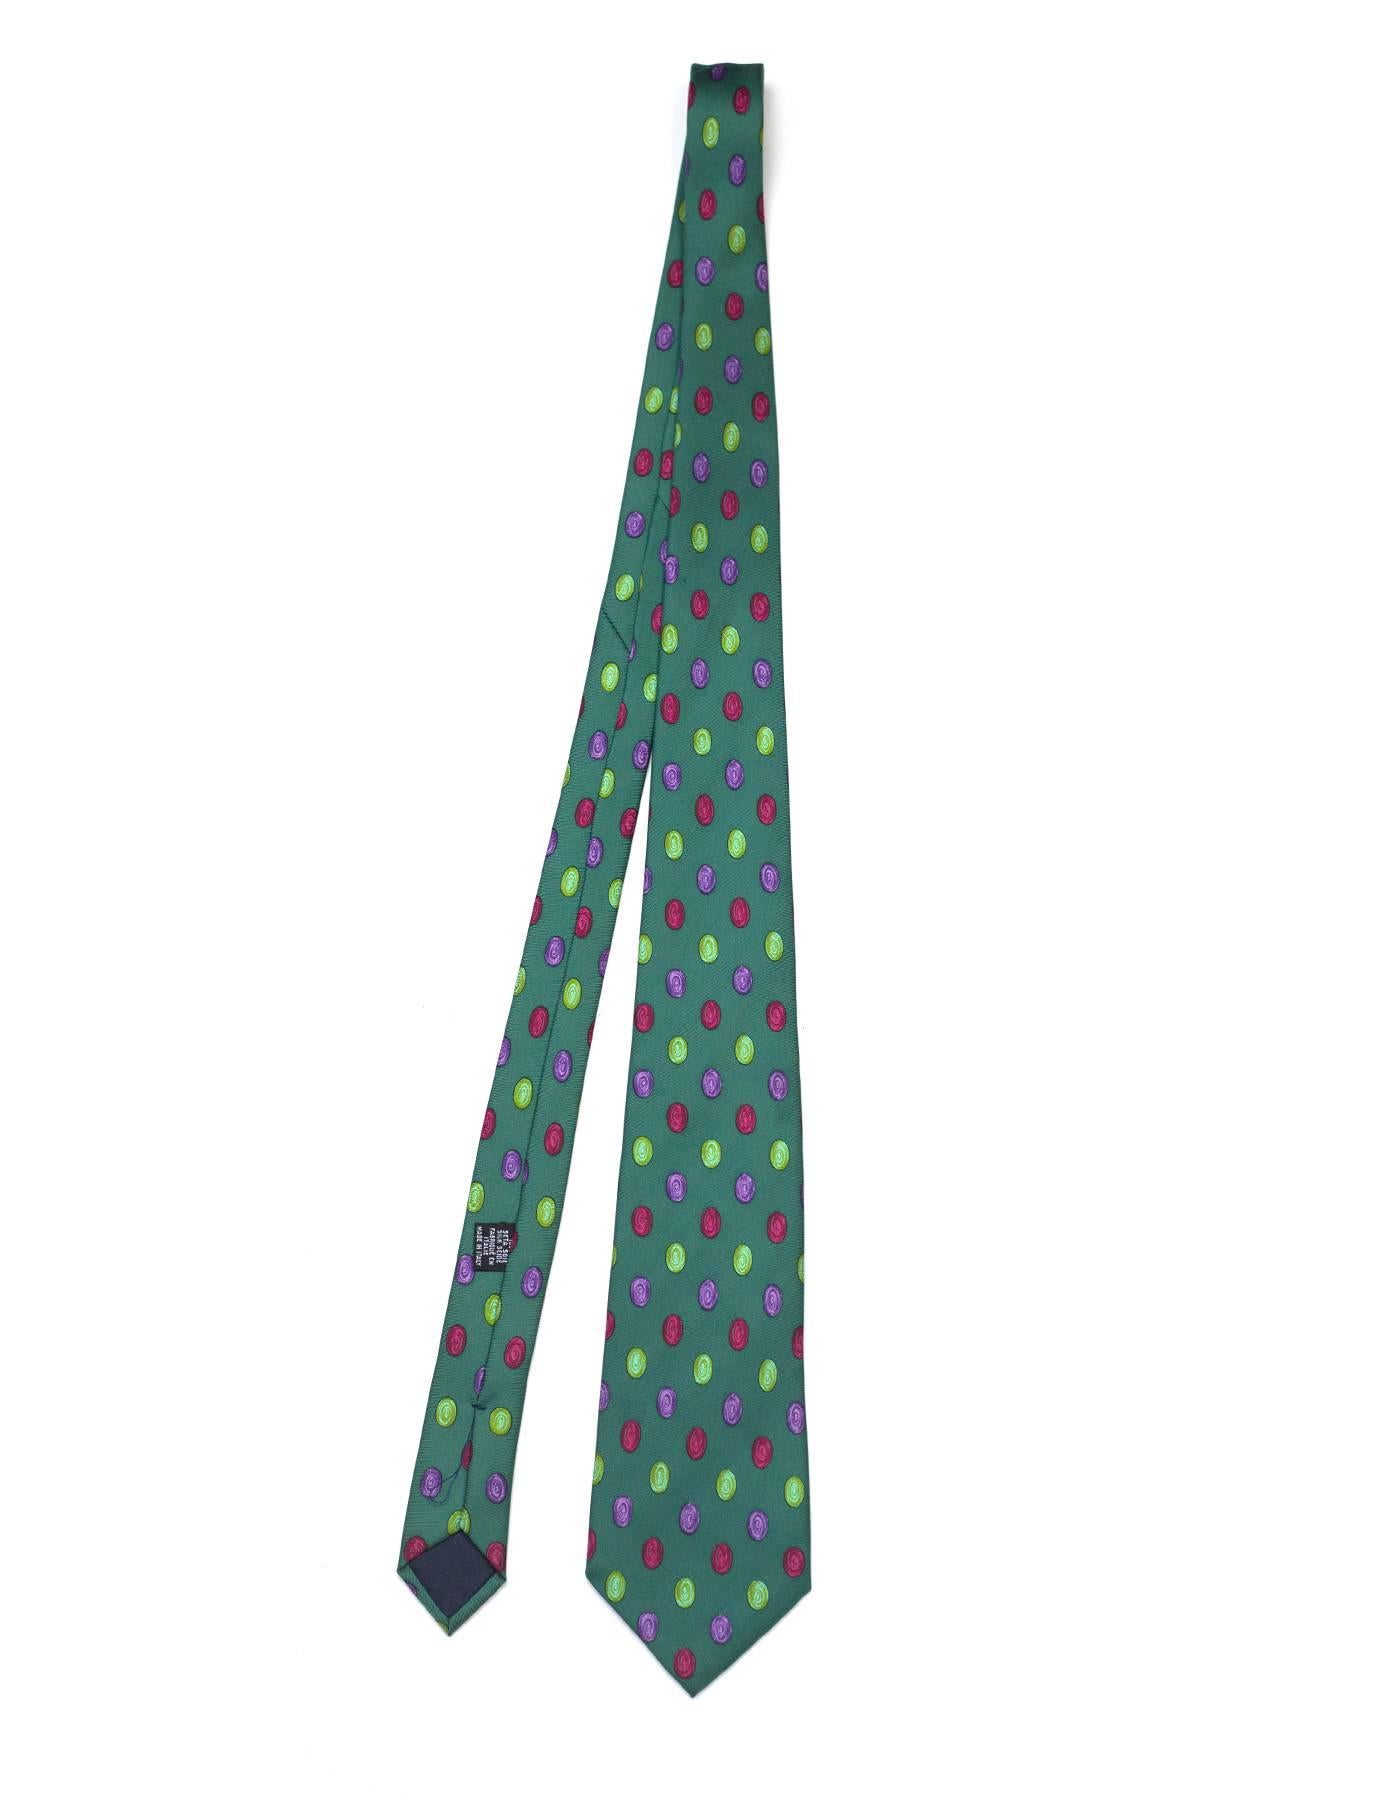 Chanel Green & Multi-Color Dot Print Silk Tie

Made In: Italy
Color: Green, purple, red, and light green
Composition: 100% silk
Overall Condition: Excellent pre-owned condition with the exception of a few small pulls throughout tie
Measurements: